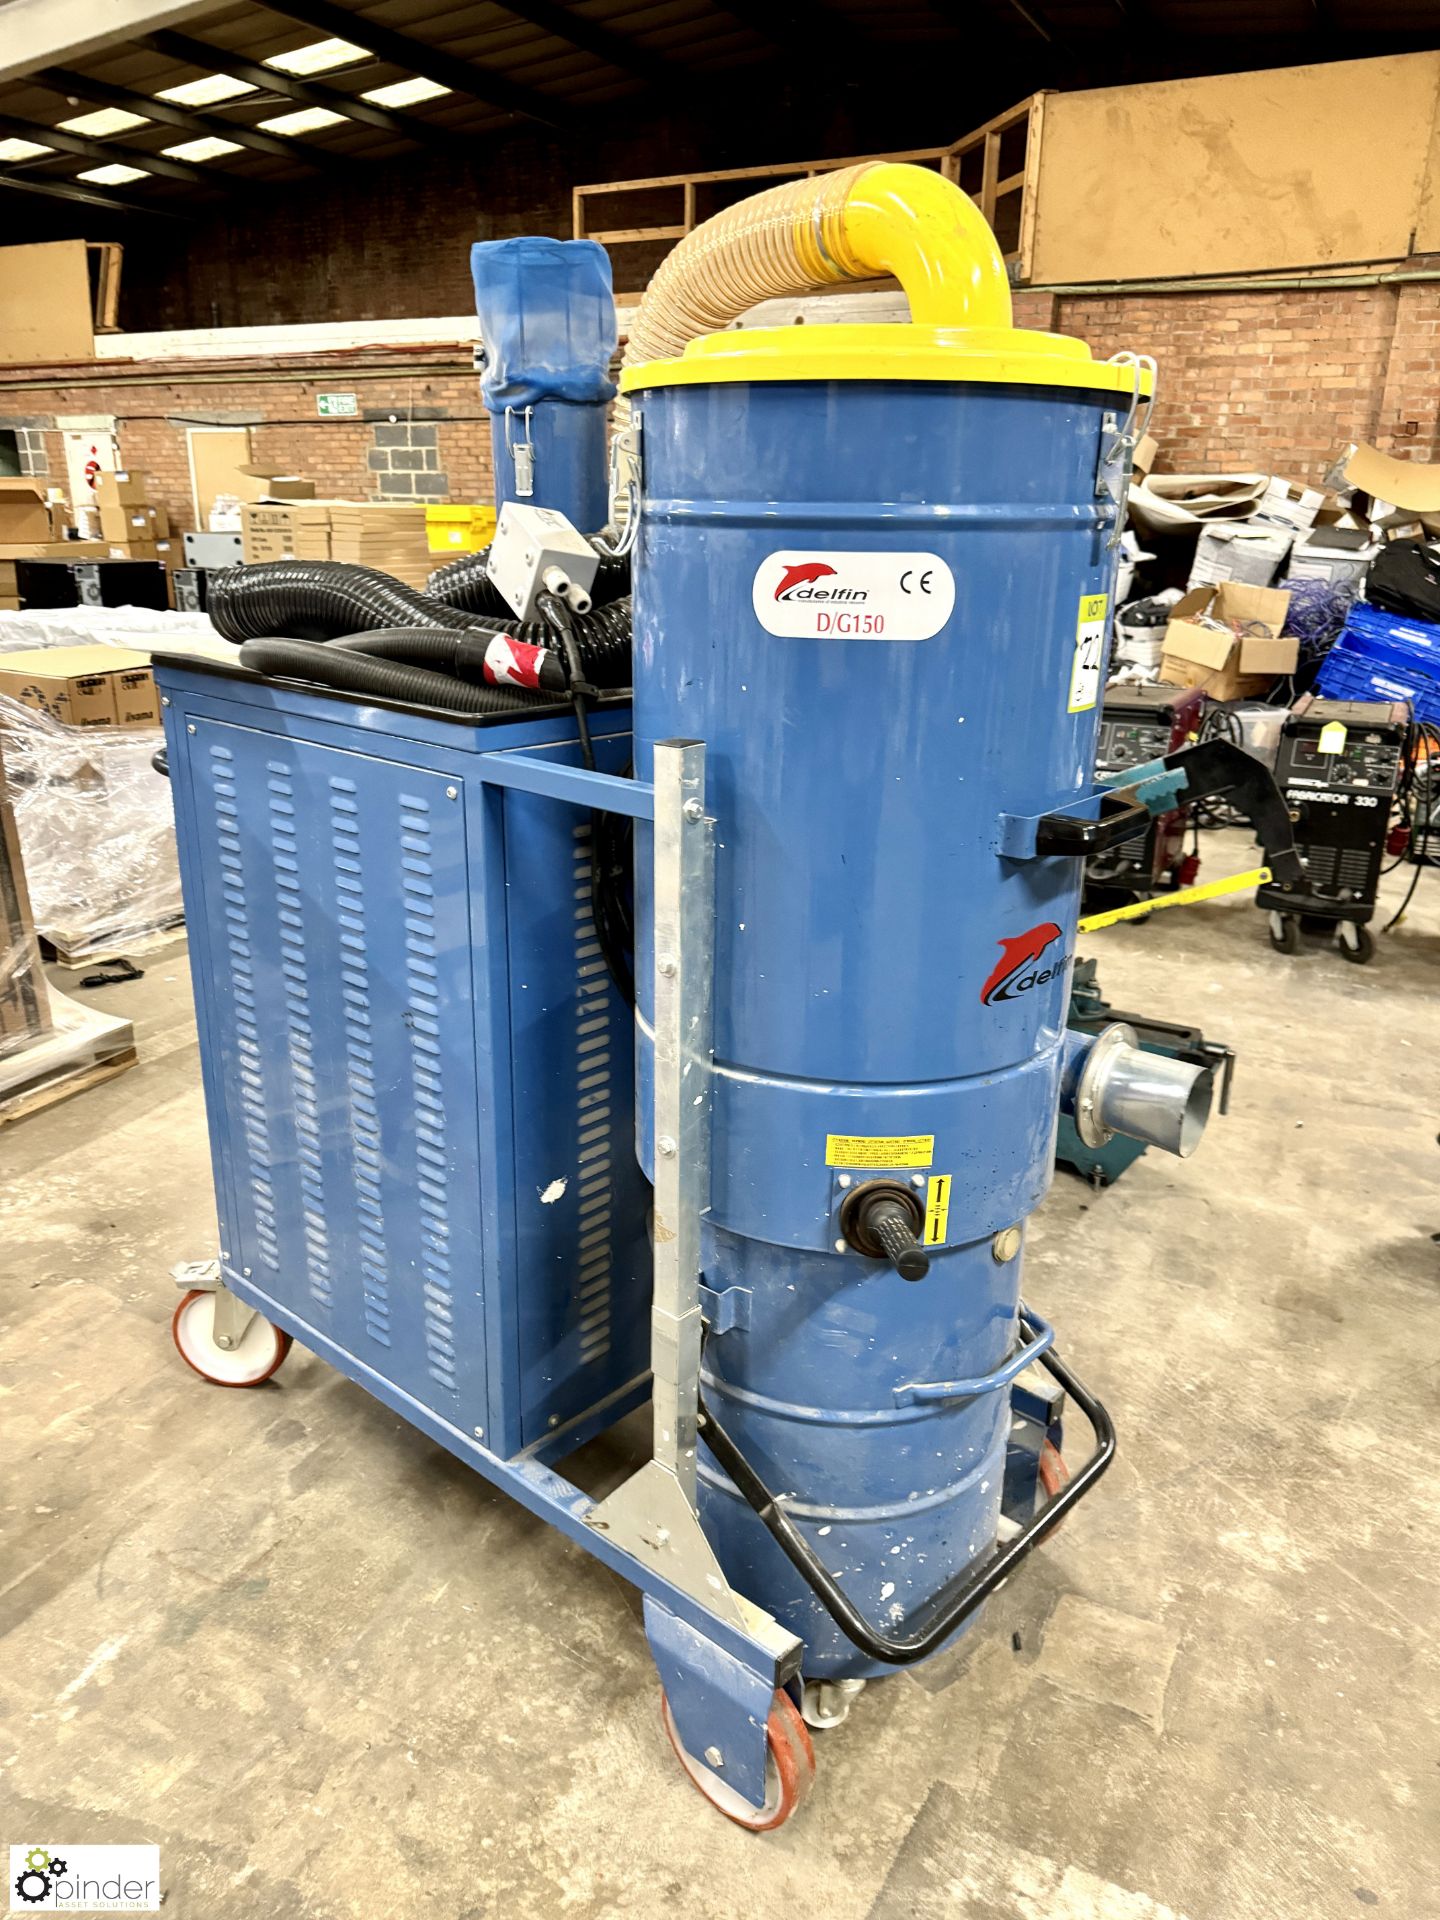 Delfin D/G150 heavy duty Industrial Vacuum Cleaner, 415volts - Image 2 of 8